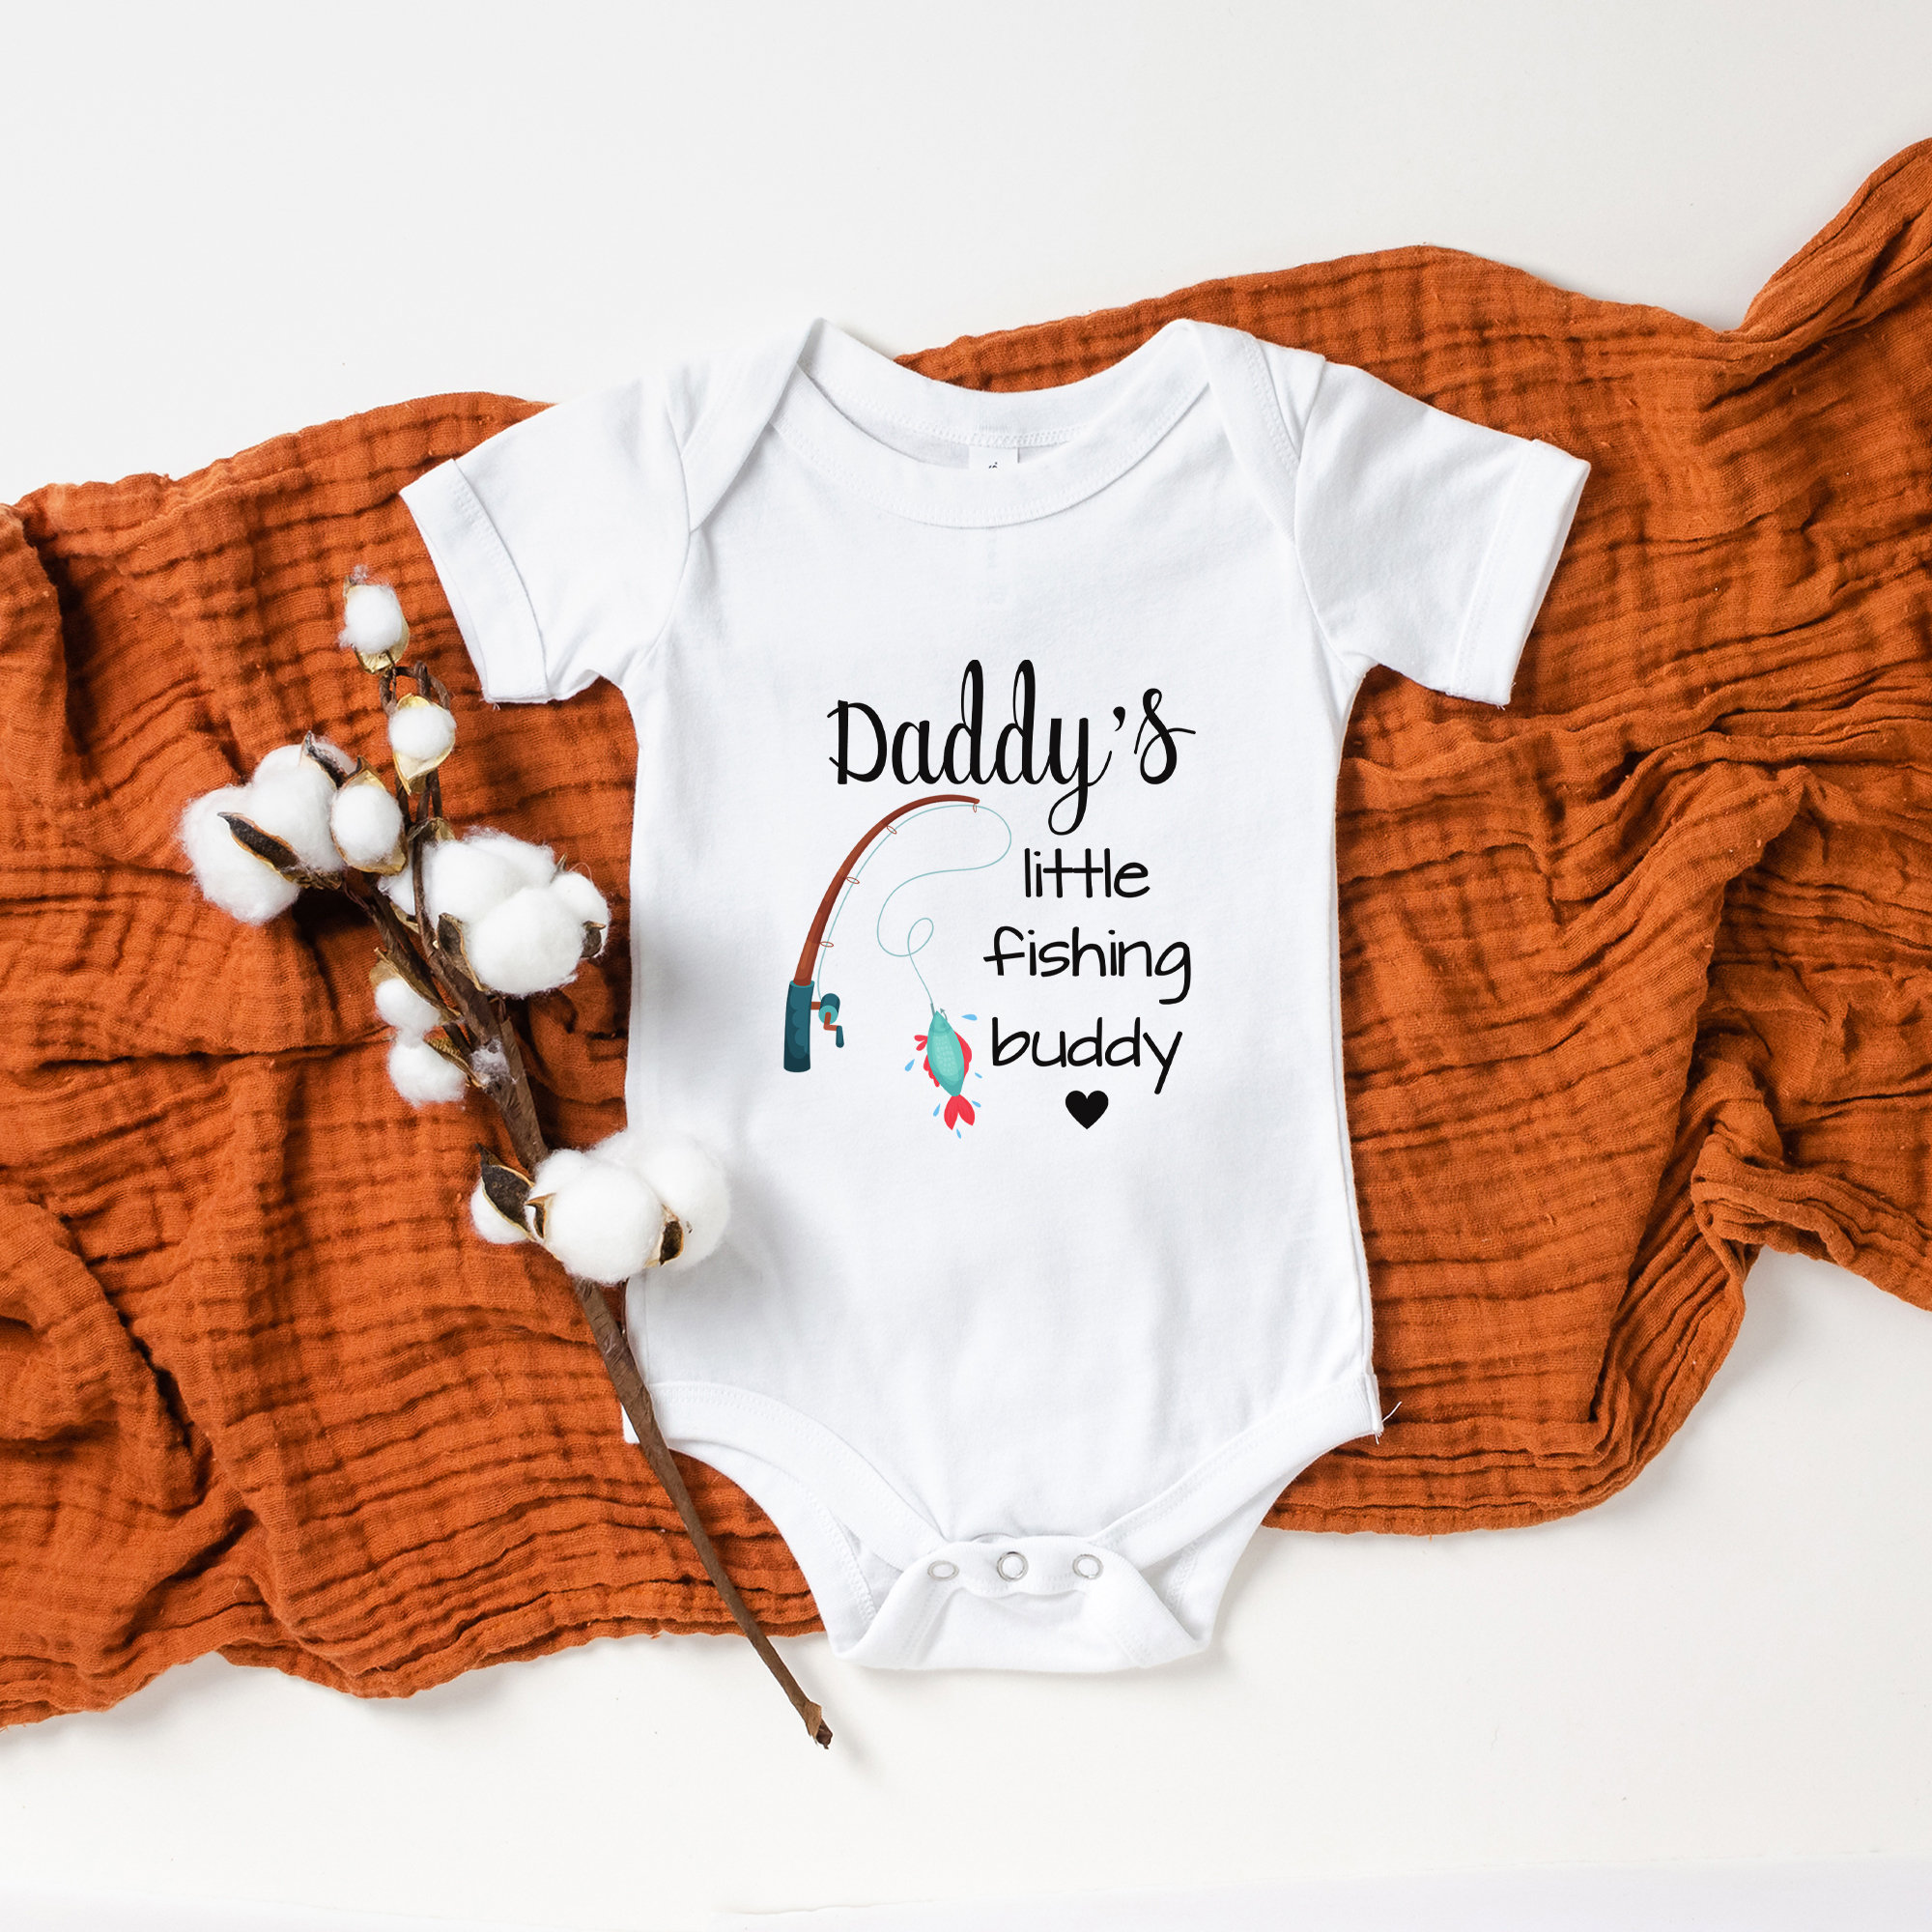 Fishing Baby Onesie® Daddy's Little Fishing Buddy Personalized